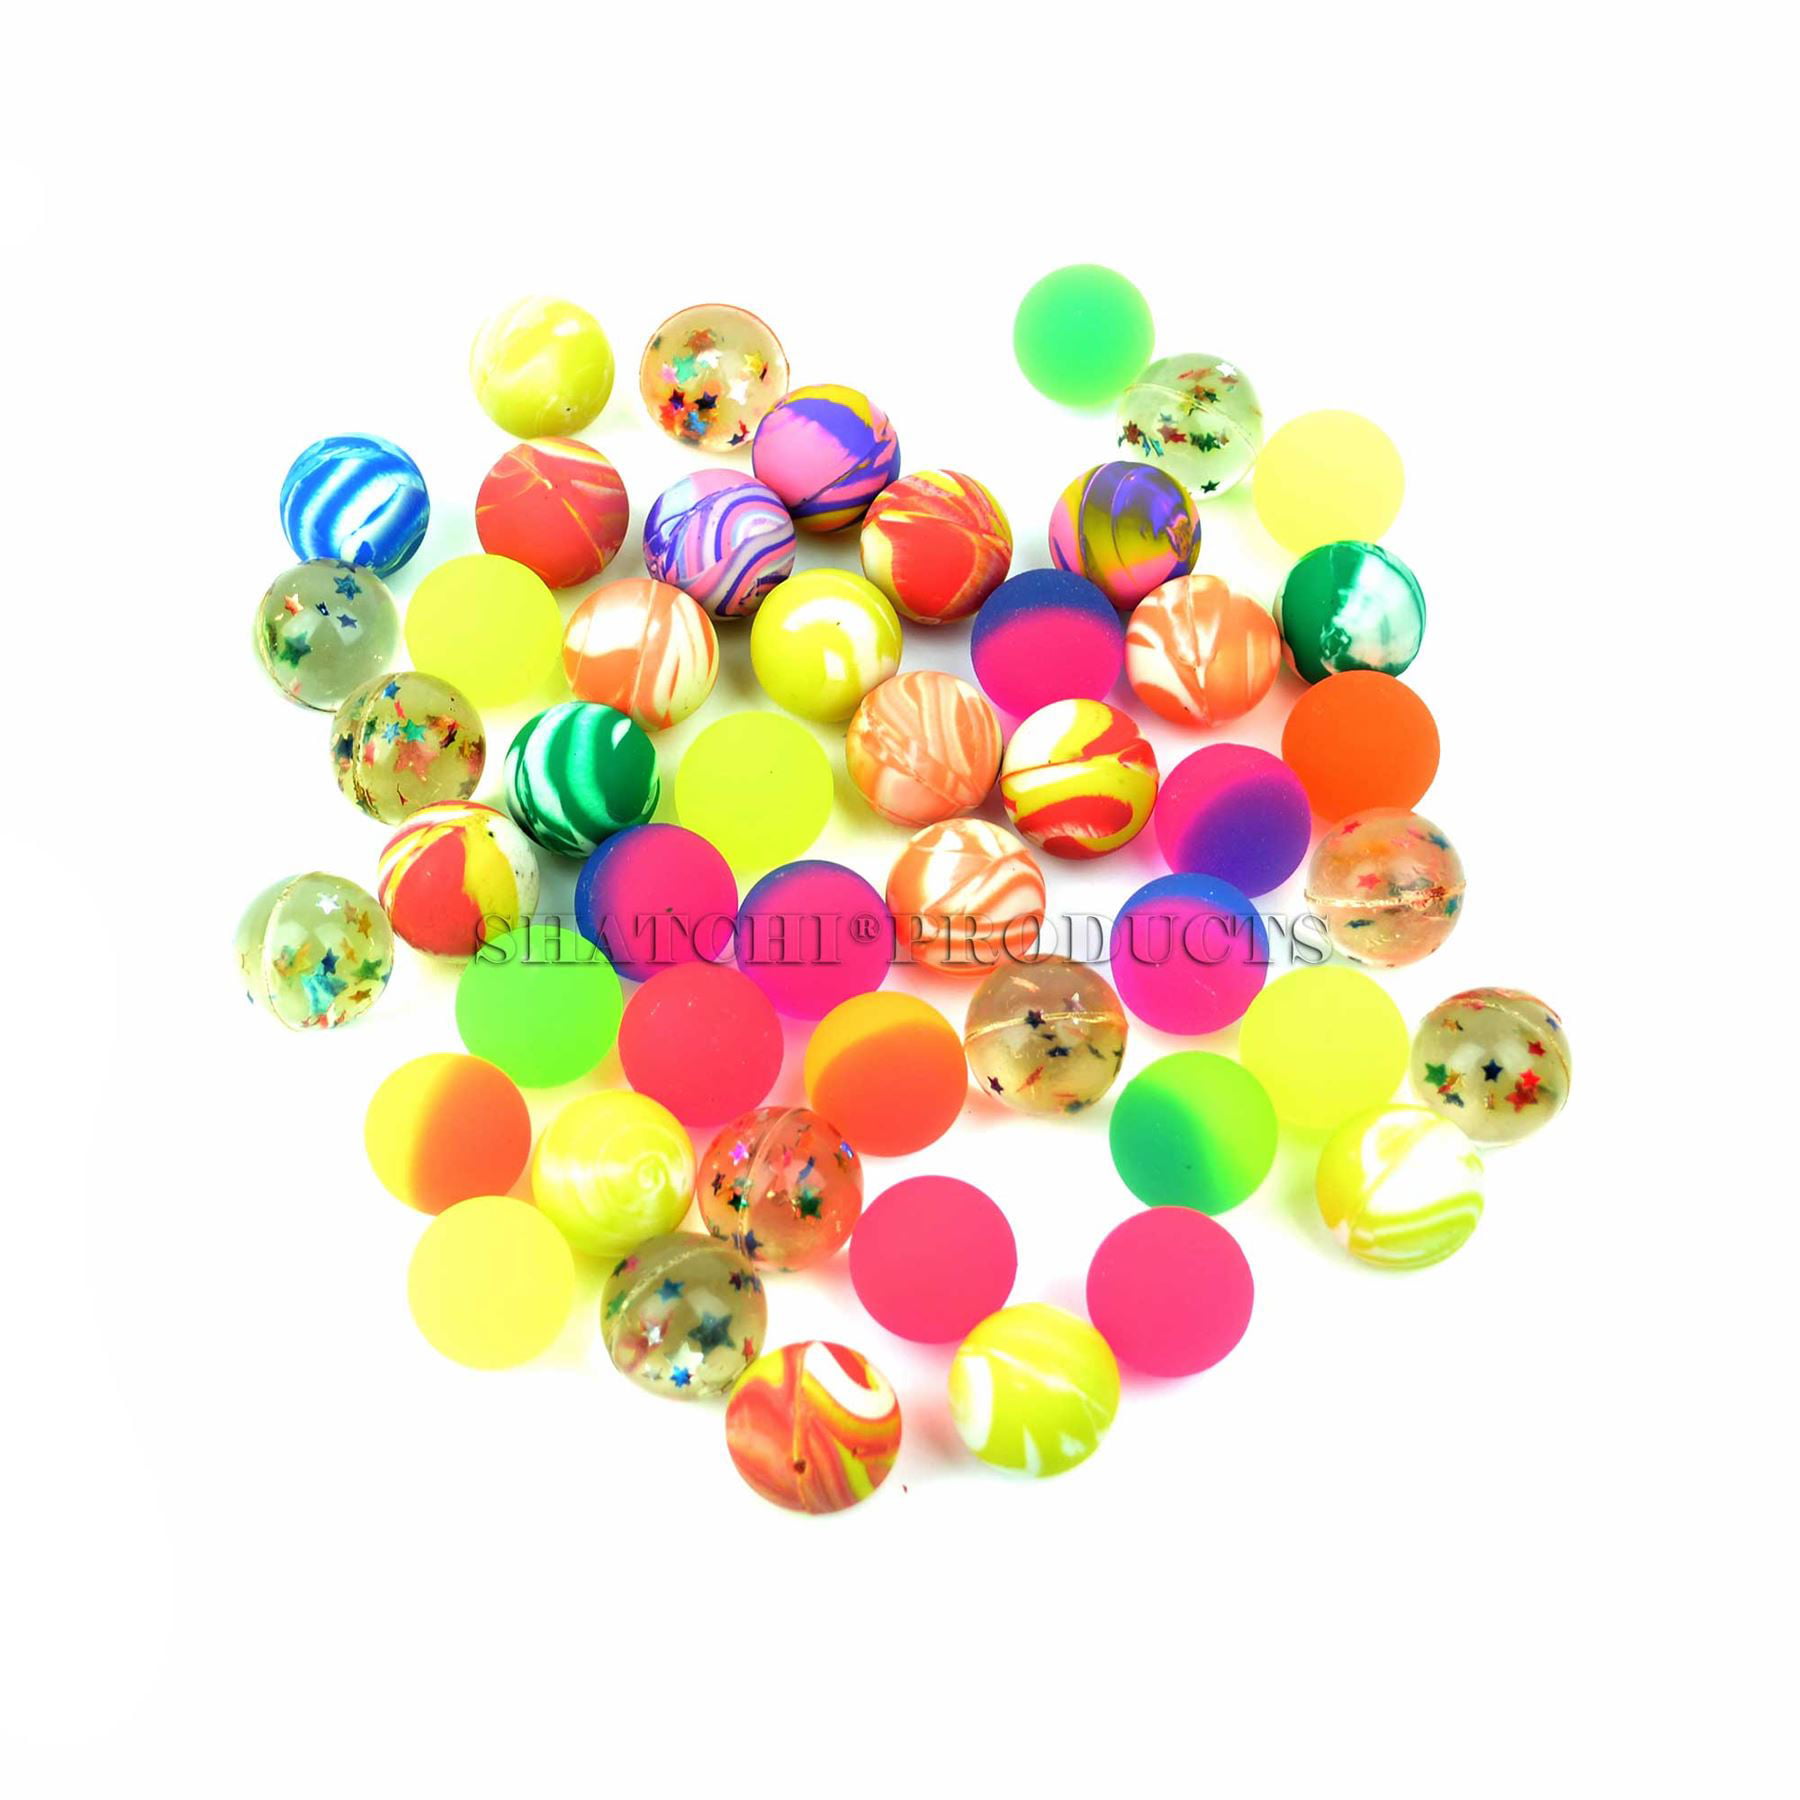 Glitter Bouncy Balls Party Bag Fillers Pack of 6 Unique Party 74058